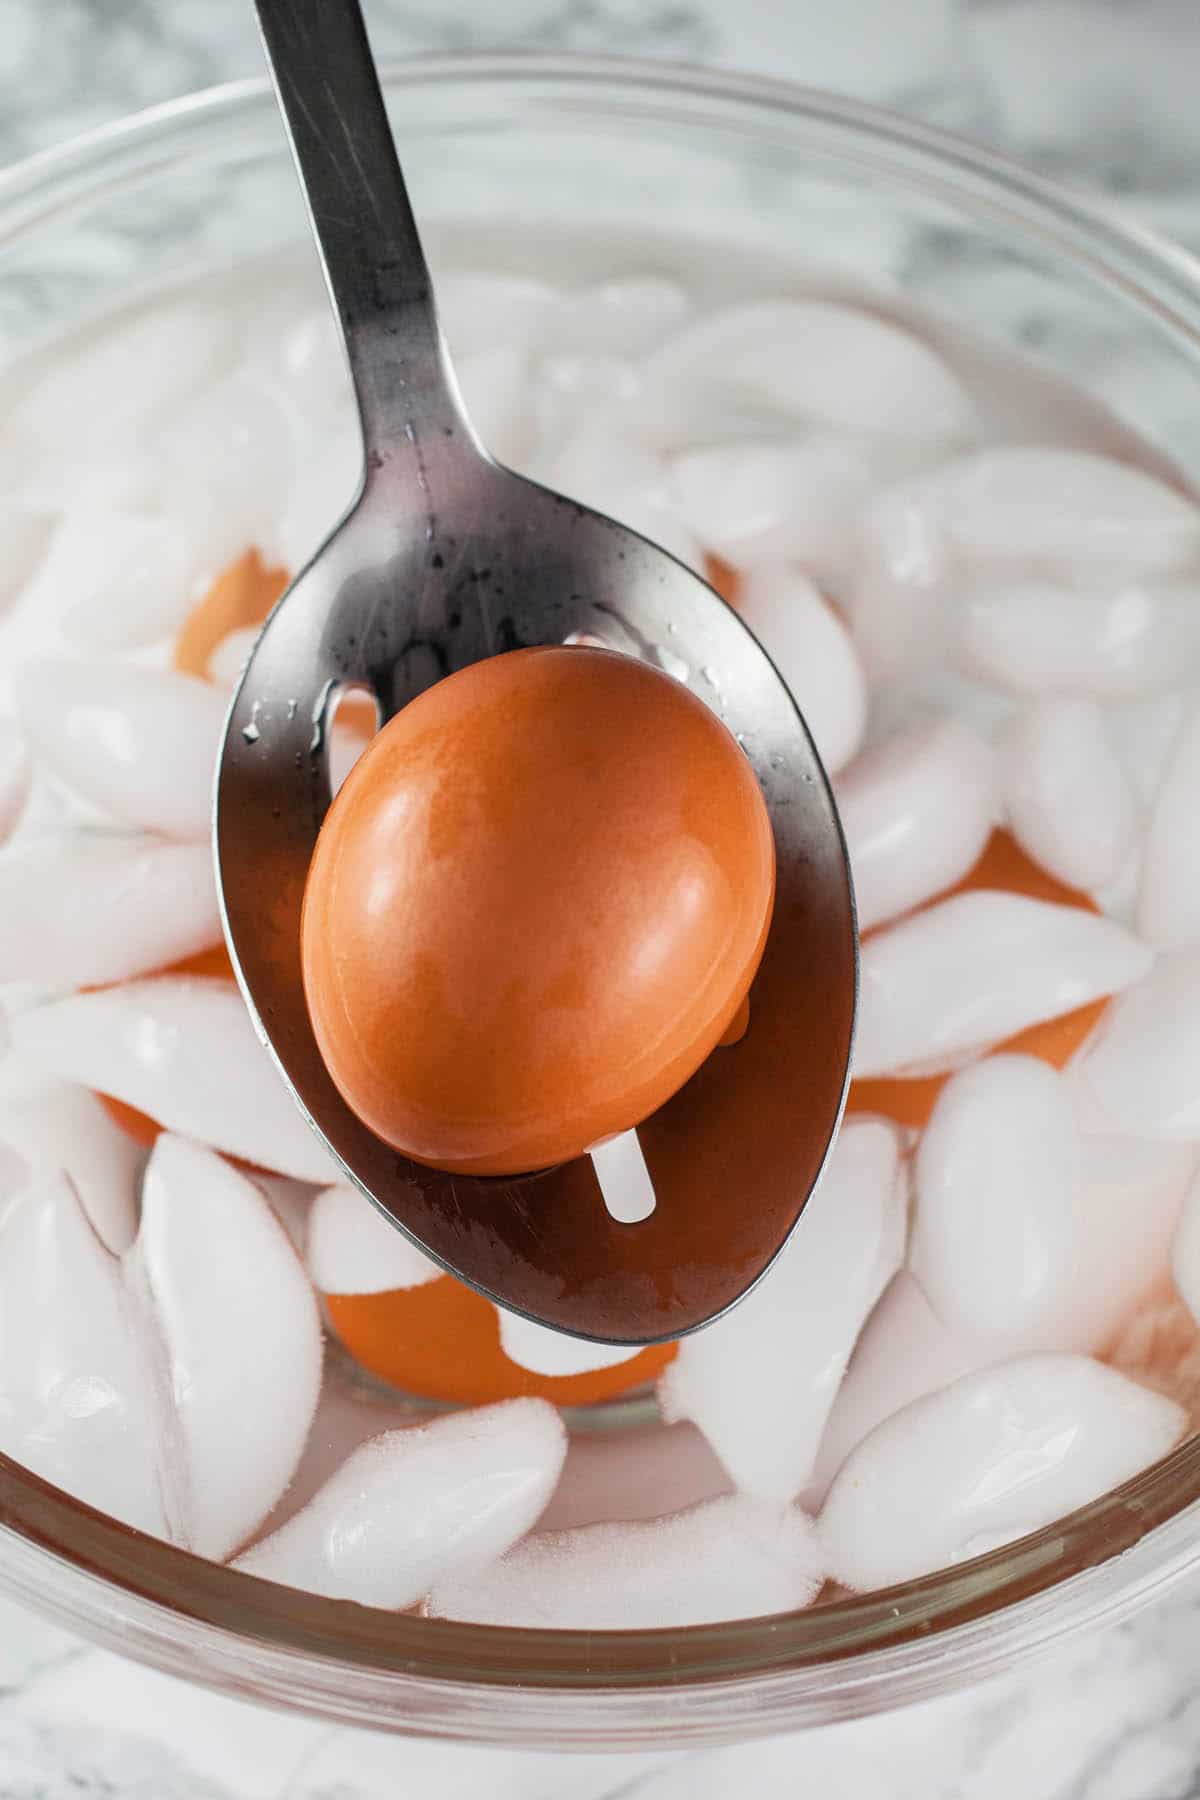 Hard boiled egg on slotted spoon lifted from bowl of ice water.